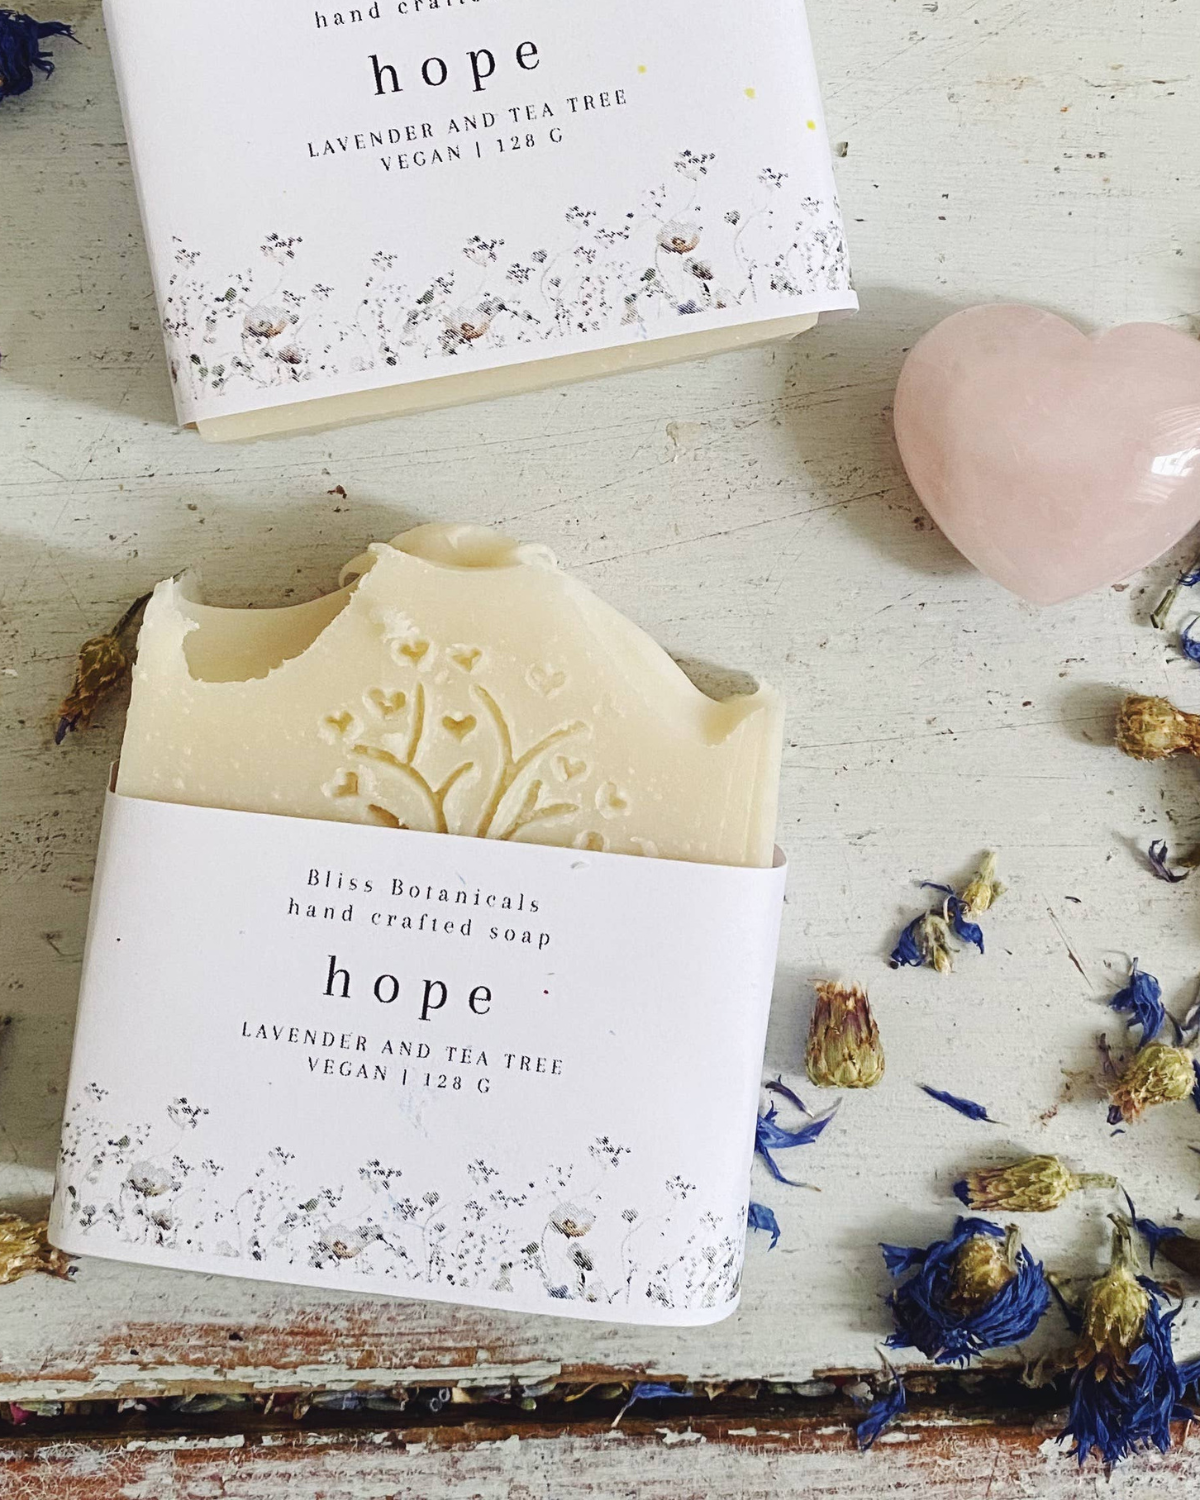 Handcrafted soap labeled "hope" with lavender and tea tree, surrounded by dried flowers and a pink heart-shaped stone on a distressed wooden surface.